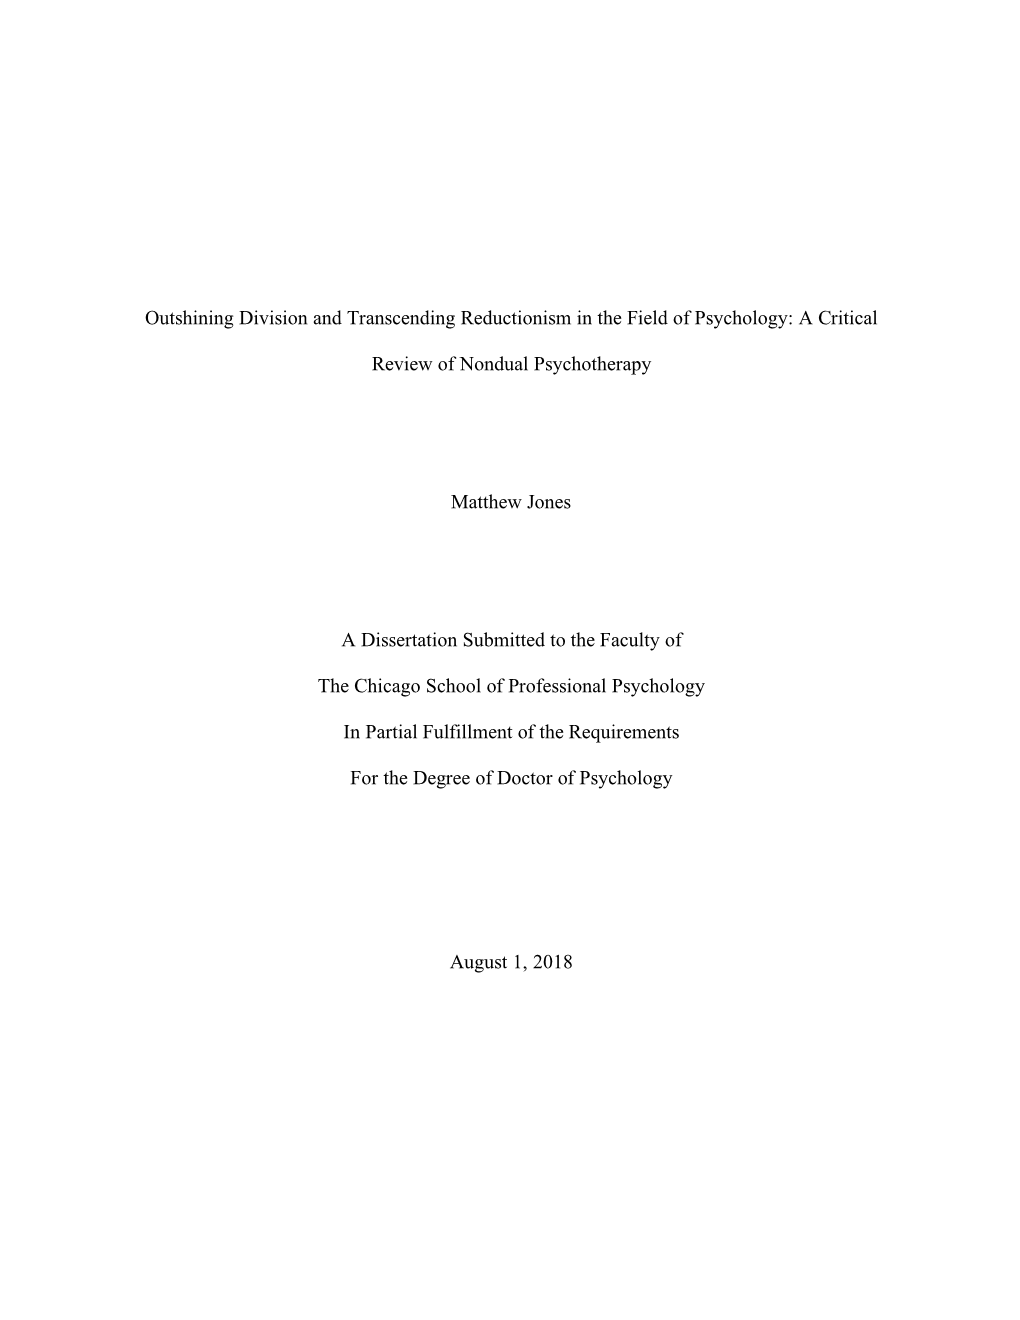 Outshining Division and Transcending Reductionism in the Field of Psychology: a Critical